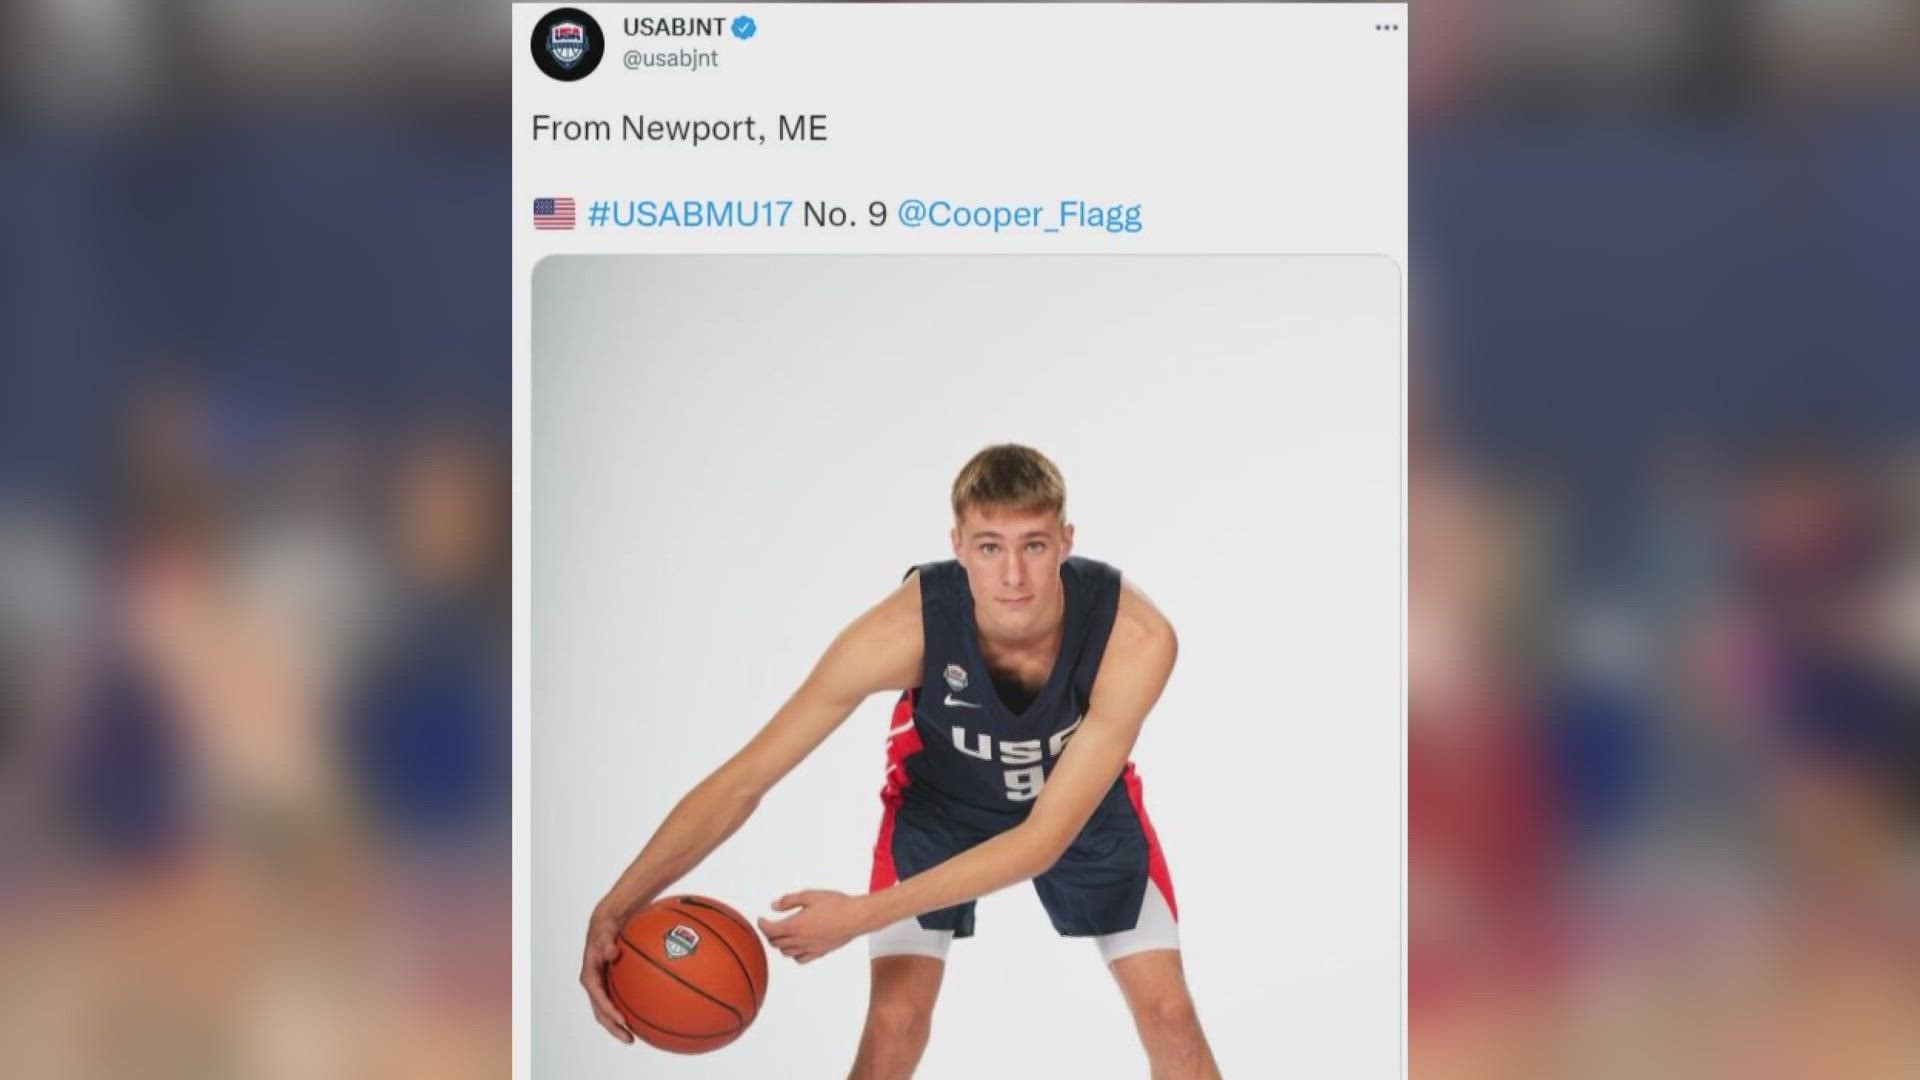 Cooper Flagg was named to Team USA's Under-17 World Cup team. He's one of just three 15-year-olds to make the team.